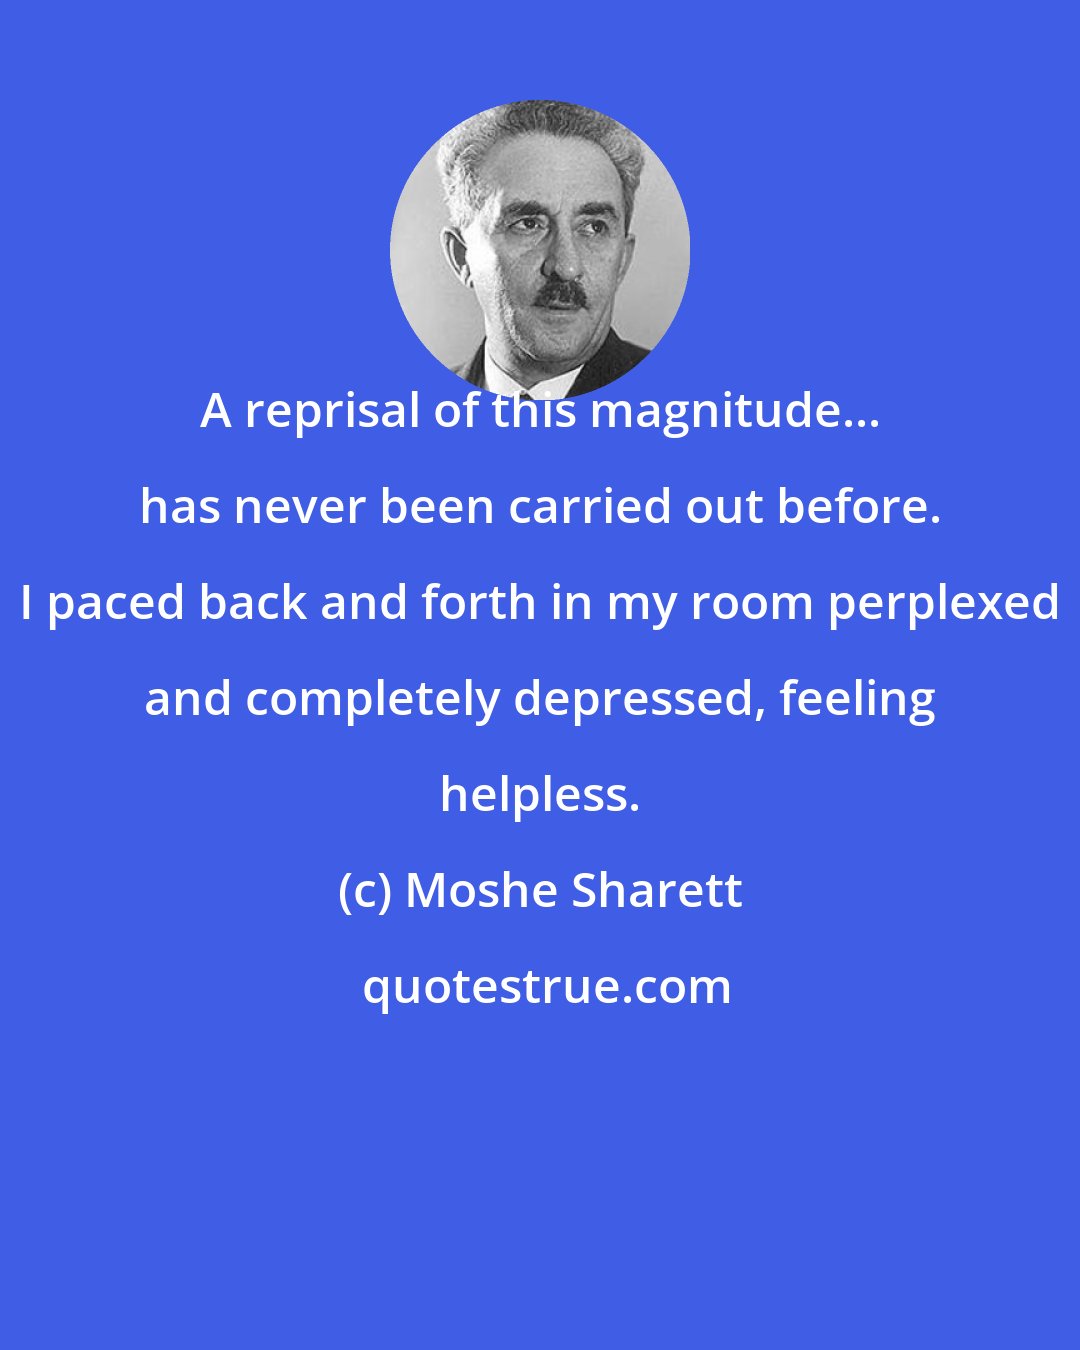 Moshe Sharett: A reprisal of this magnitude... has never been carried out before. I paced back and forth in my room perplexed and completely depressed, feeling helpless.